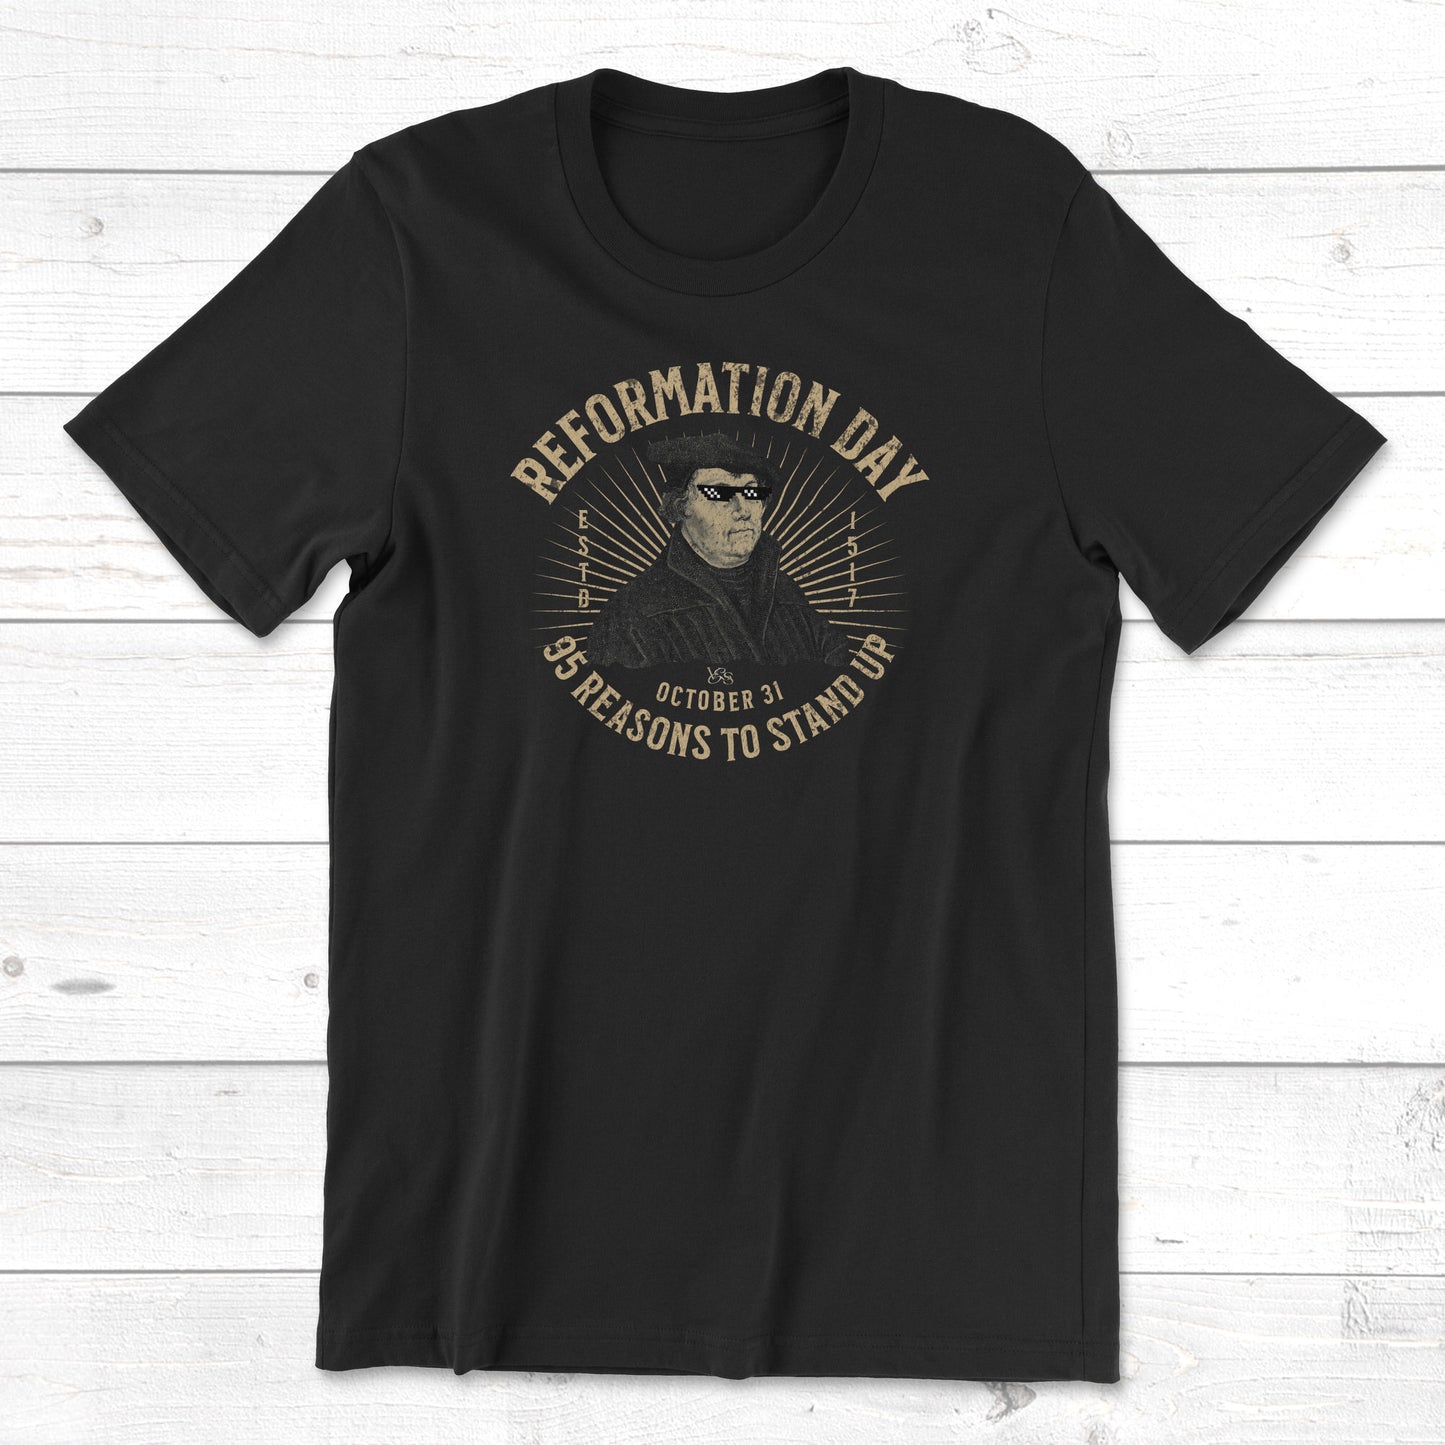 Reformation Day Martin Luther t-shirt in vintage black